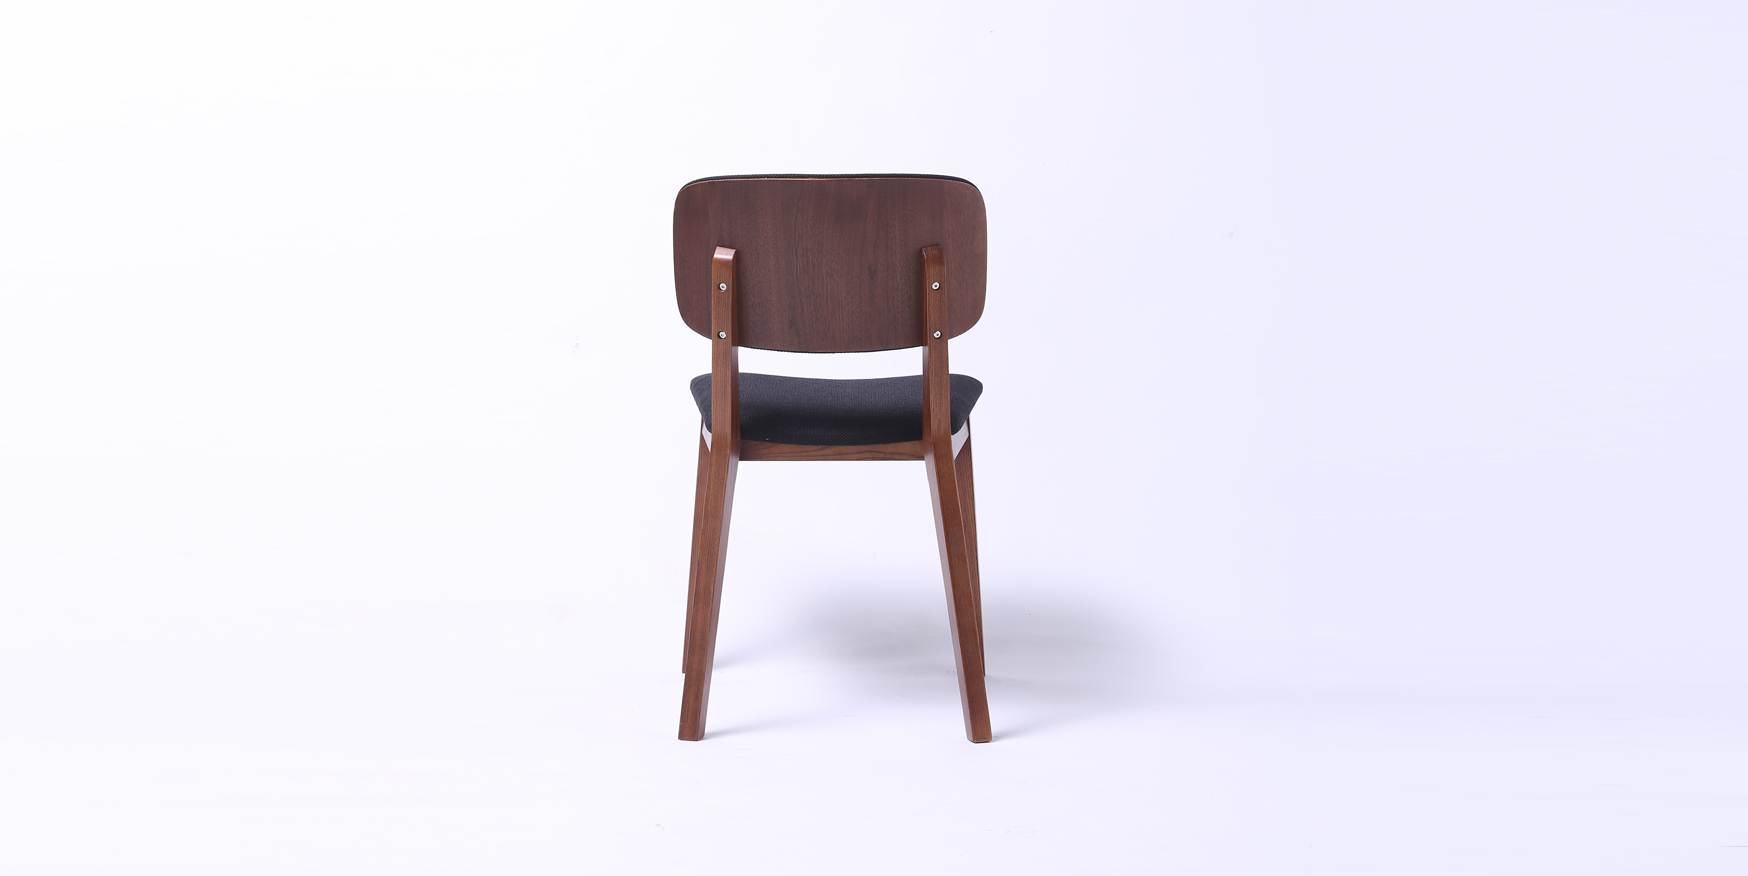 C8 Dining Chair Modern Nordic Wooden Chair Solid Wood Chair